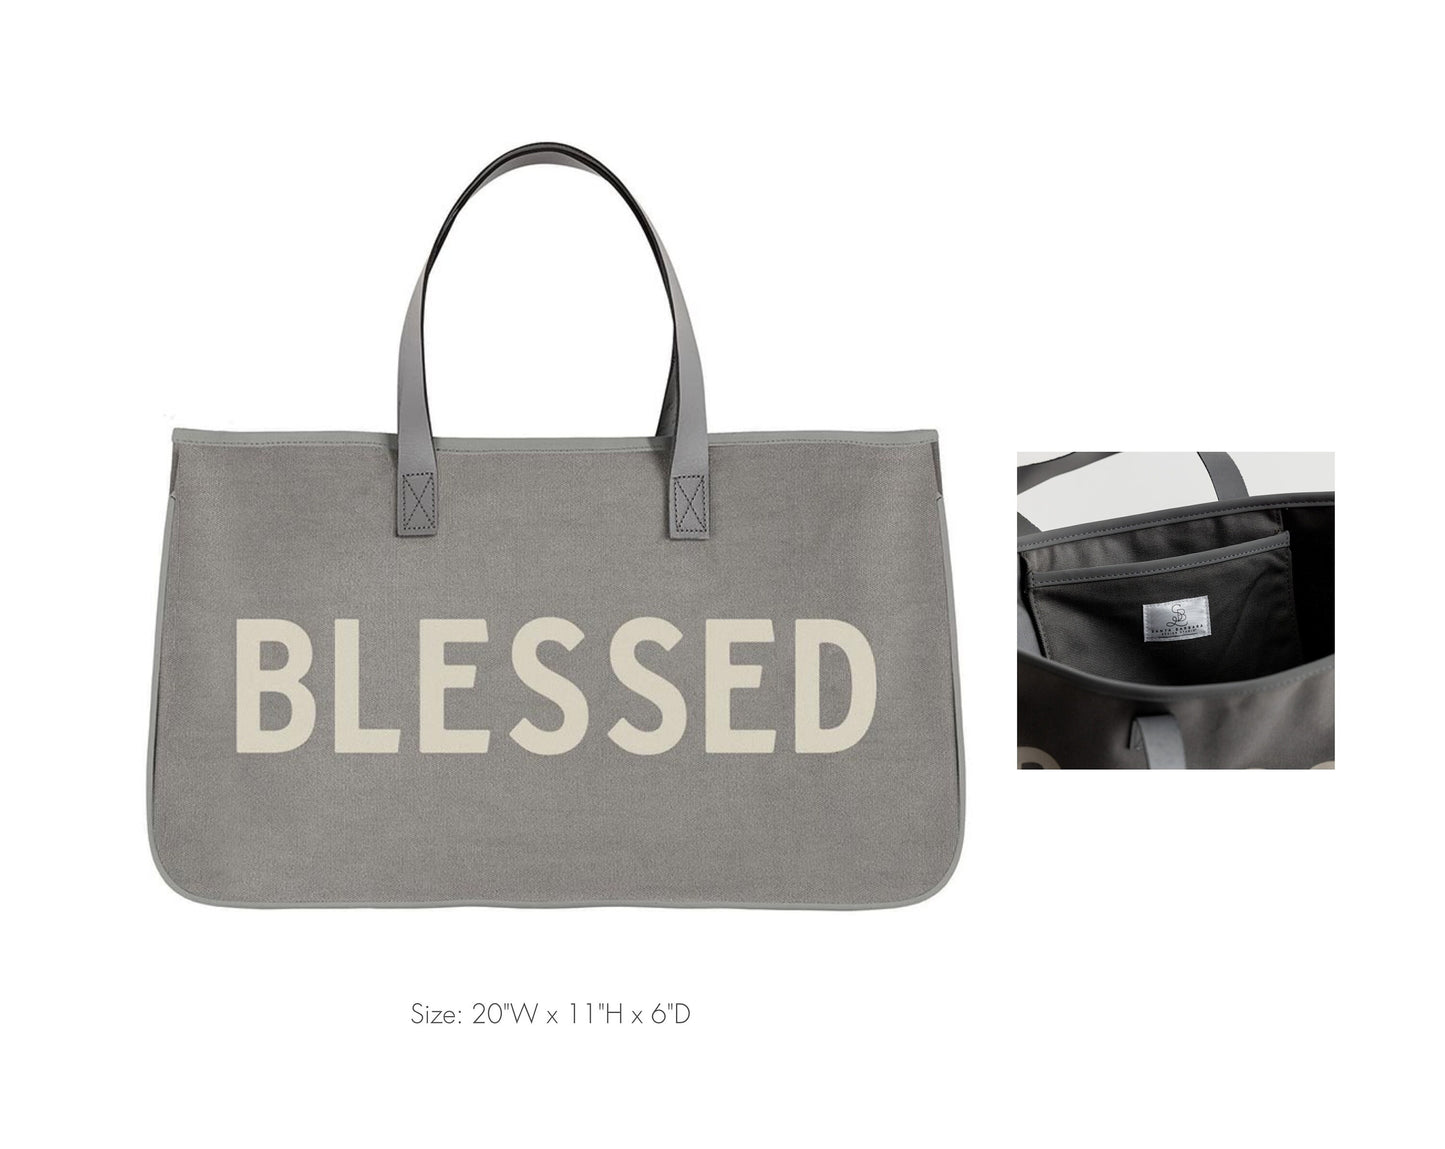 Thinking of You Love & Blessed Christian Gift Box